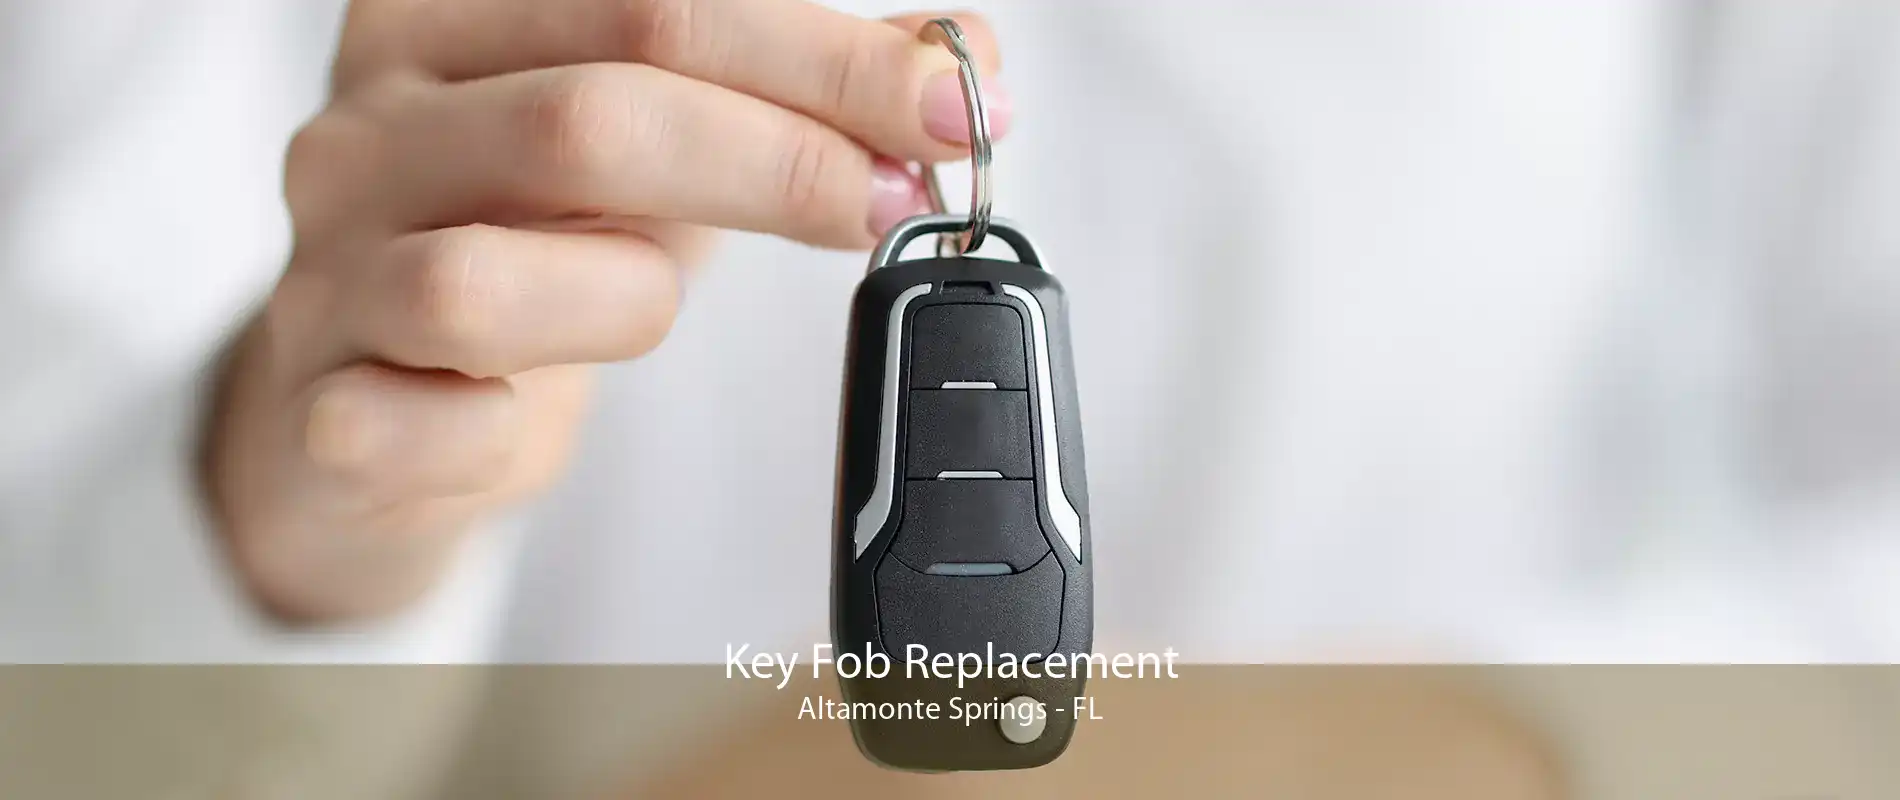 Key Fob Replacement Altamonte Springs - FL